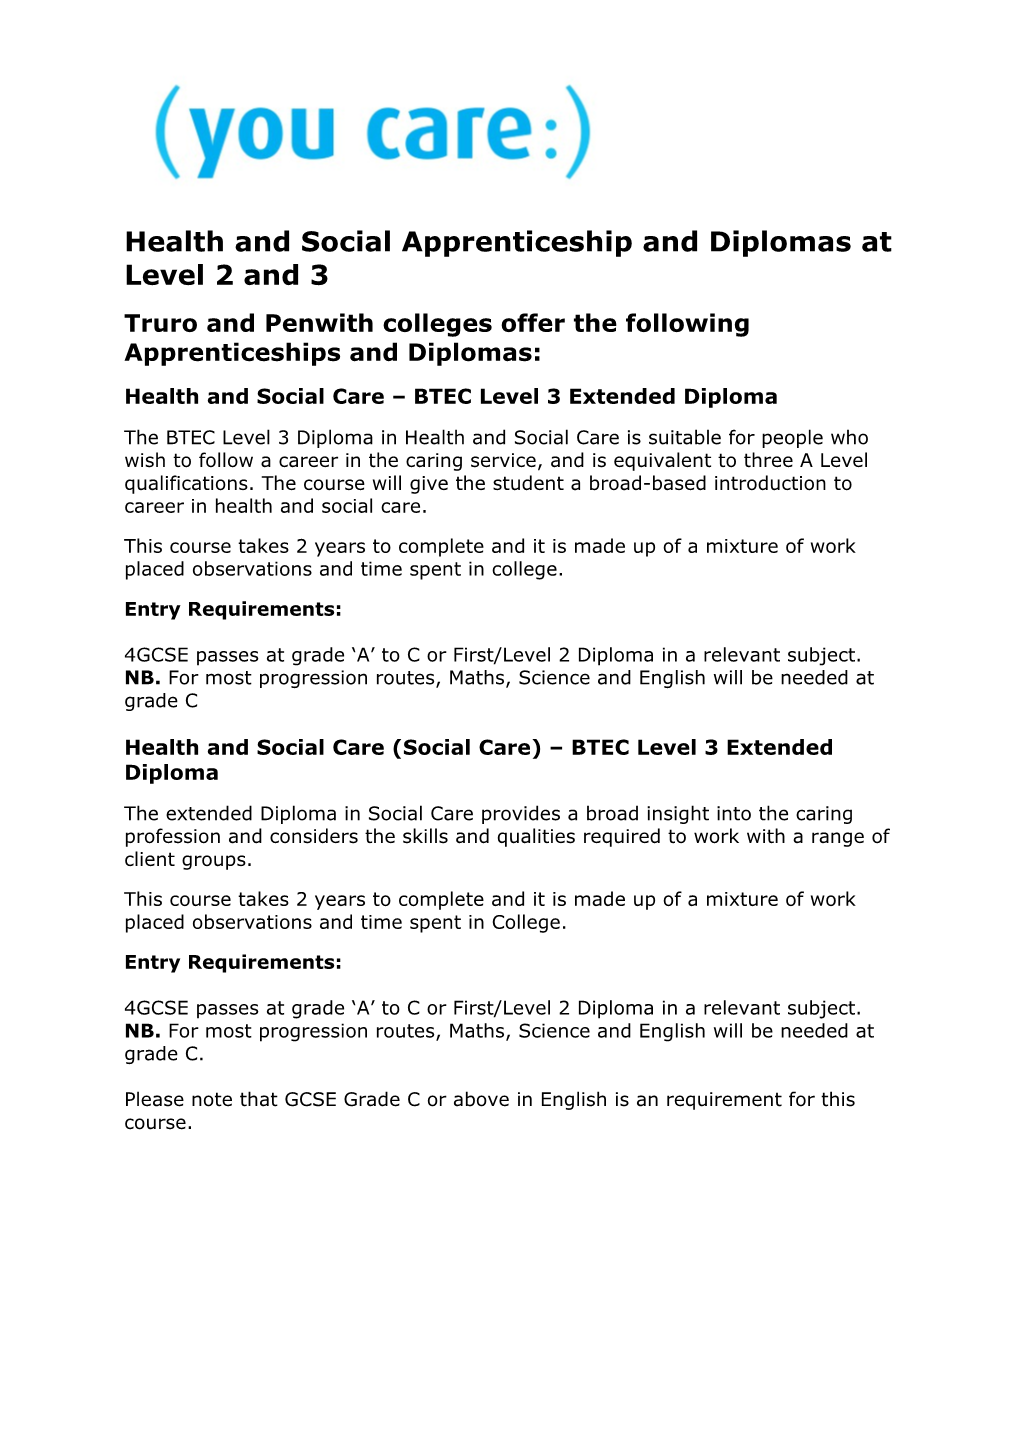 Health and Social Apprenticeship and Diplomas at Level 2 and 3